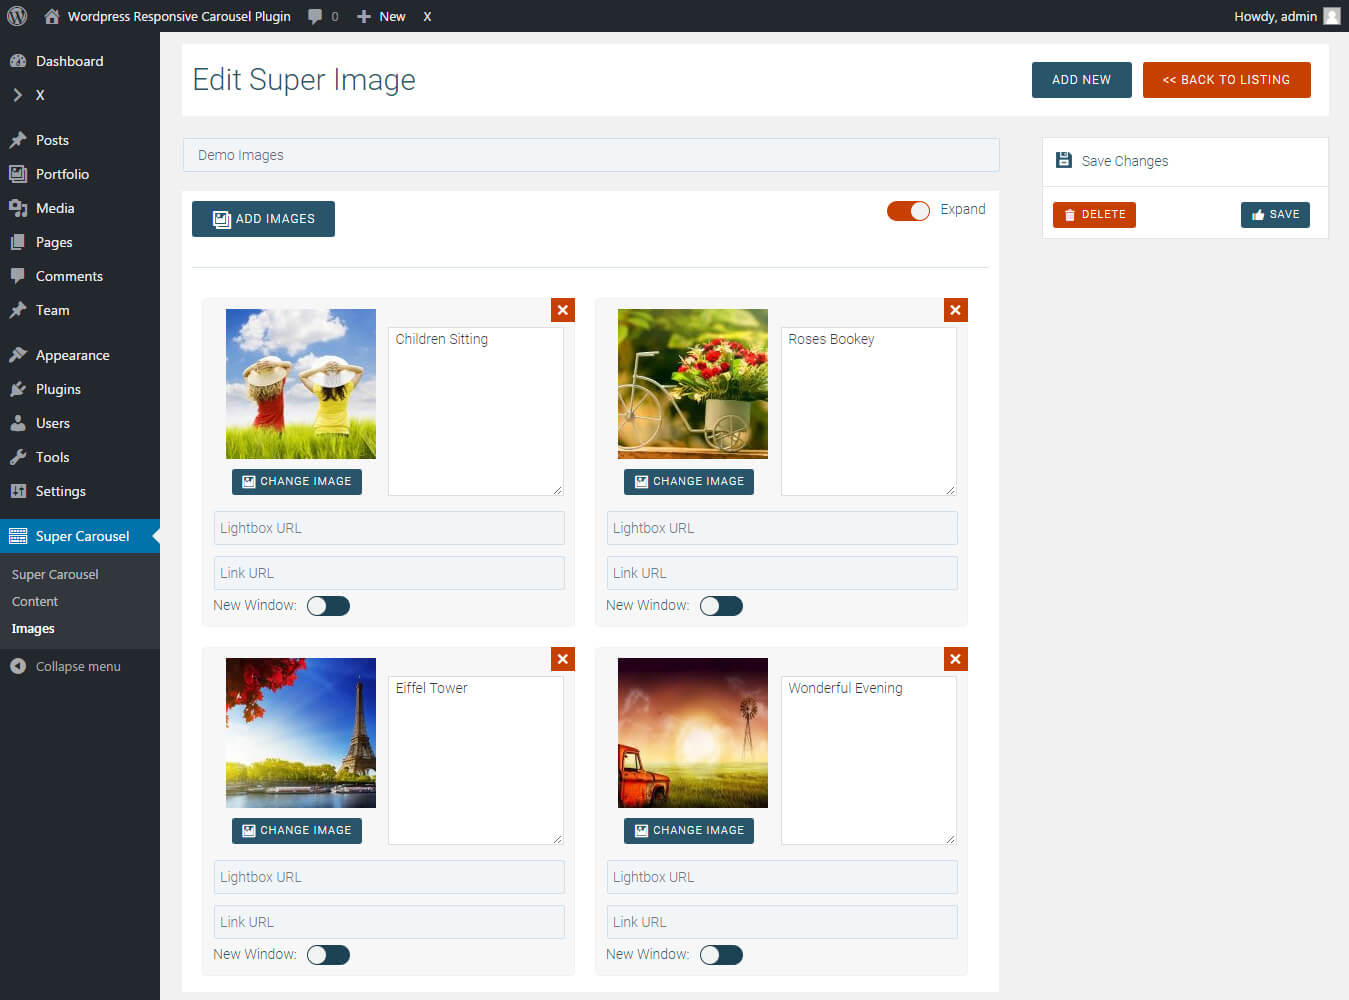 Super Image Interface Expanded